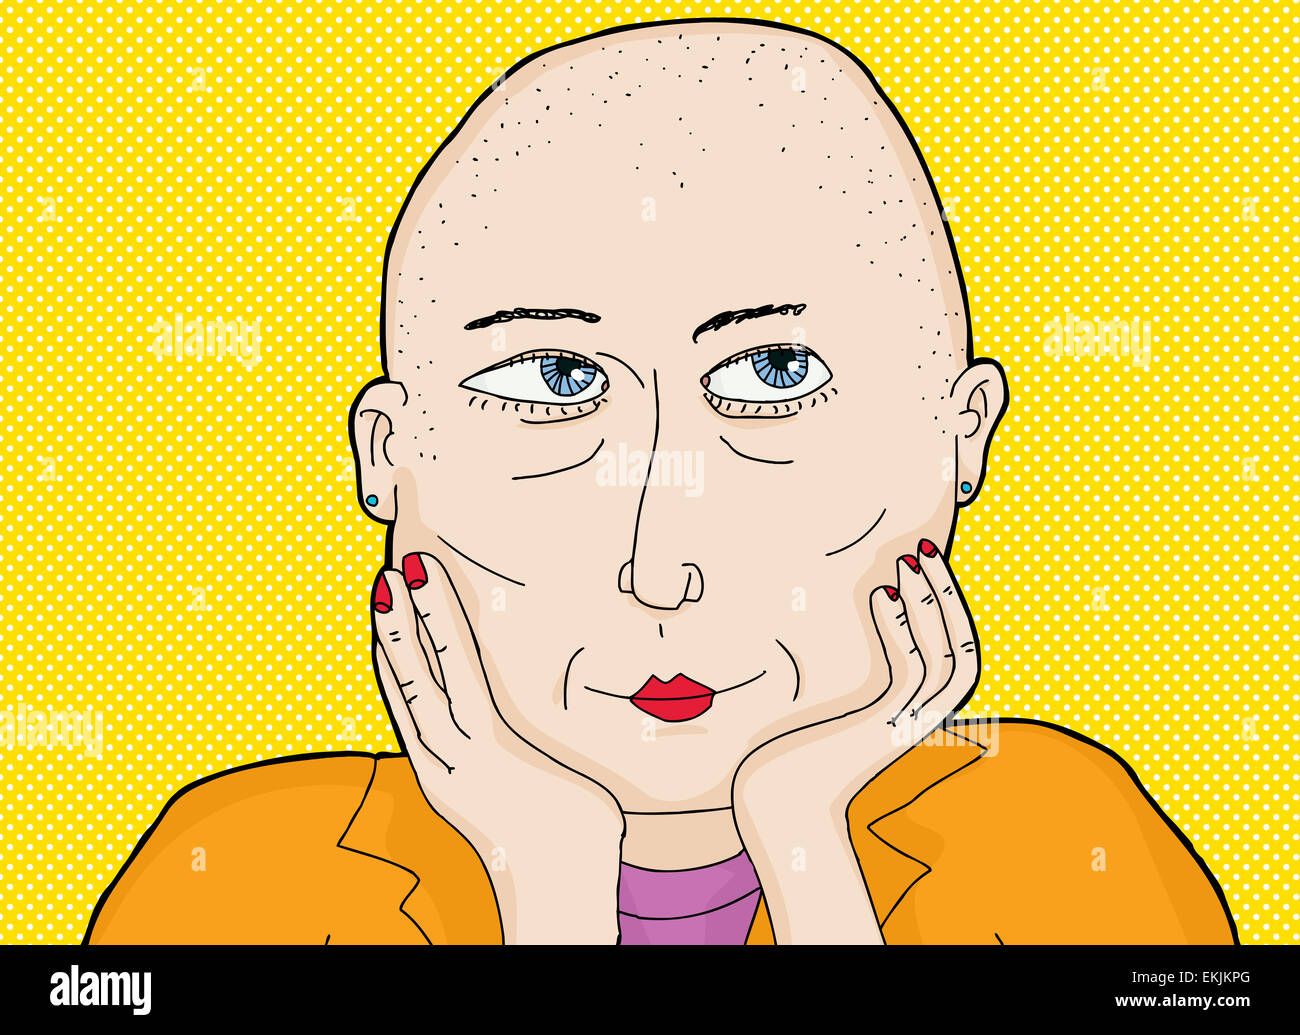 Cartoon of thoughtful grinning lady with shaved head Stock Photo. 